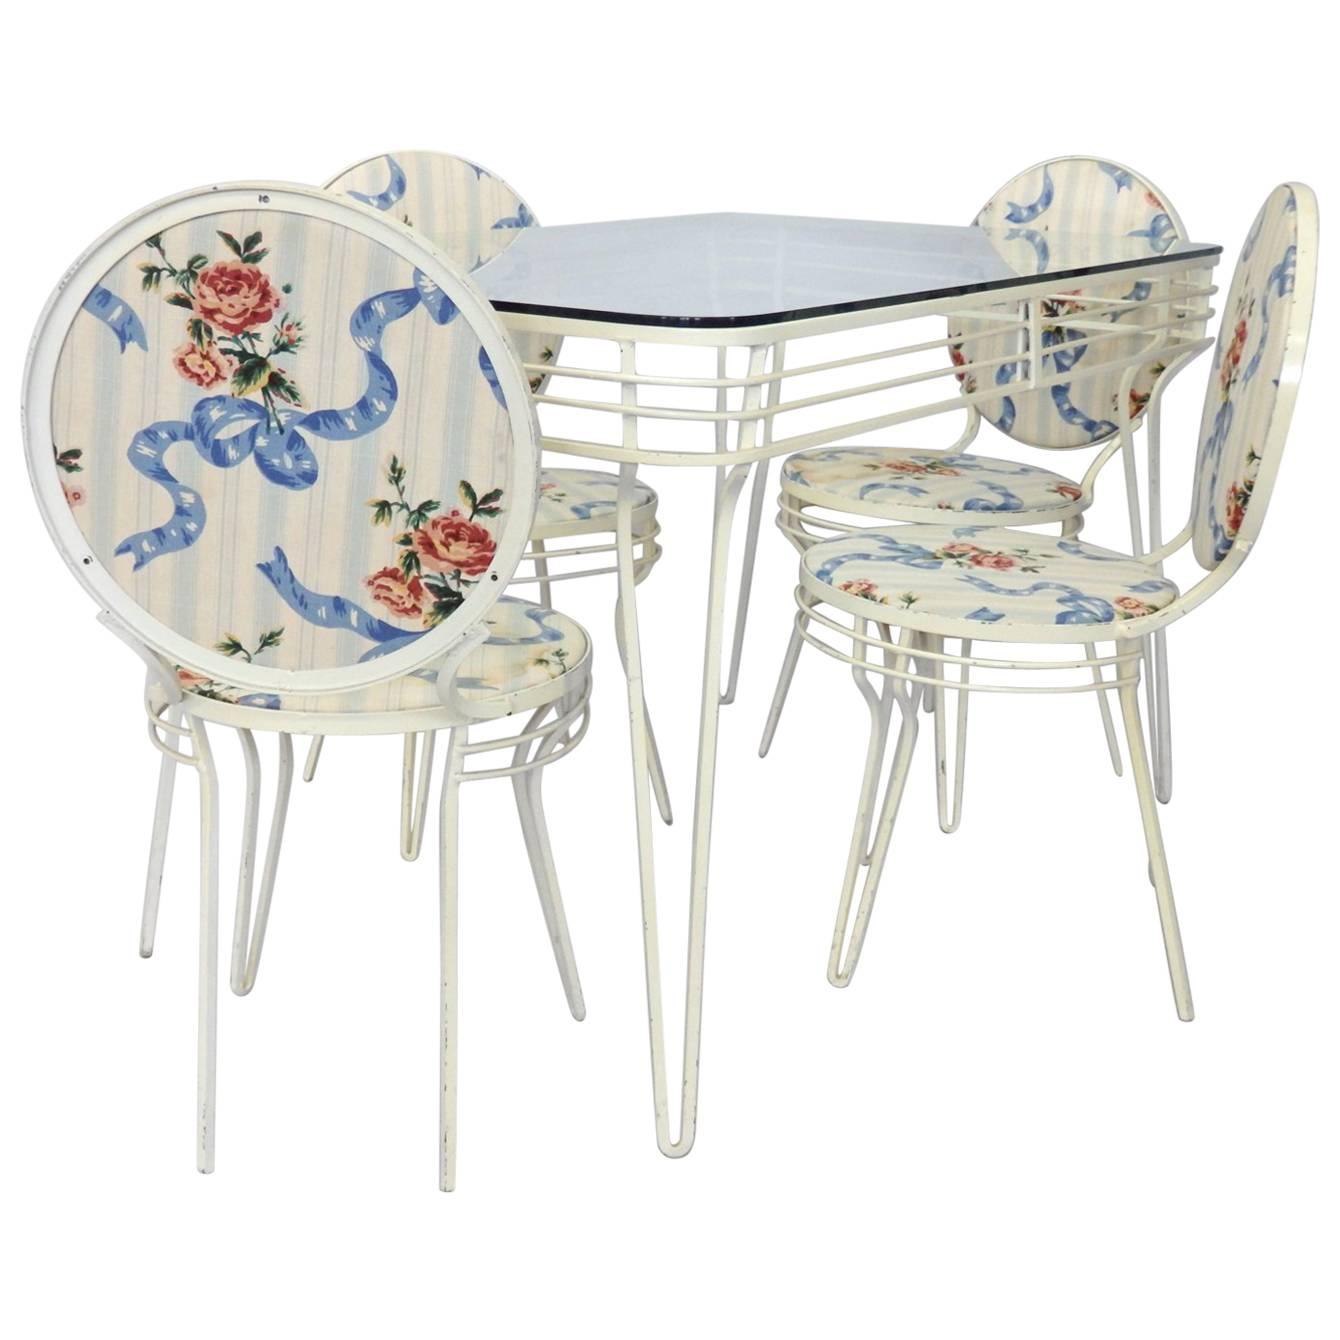 Wrought Iron Art Deco Moderne Dinette Table and Chairs